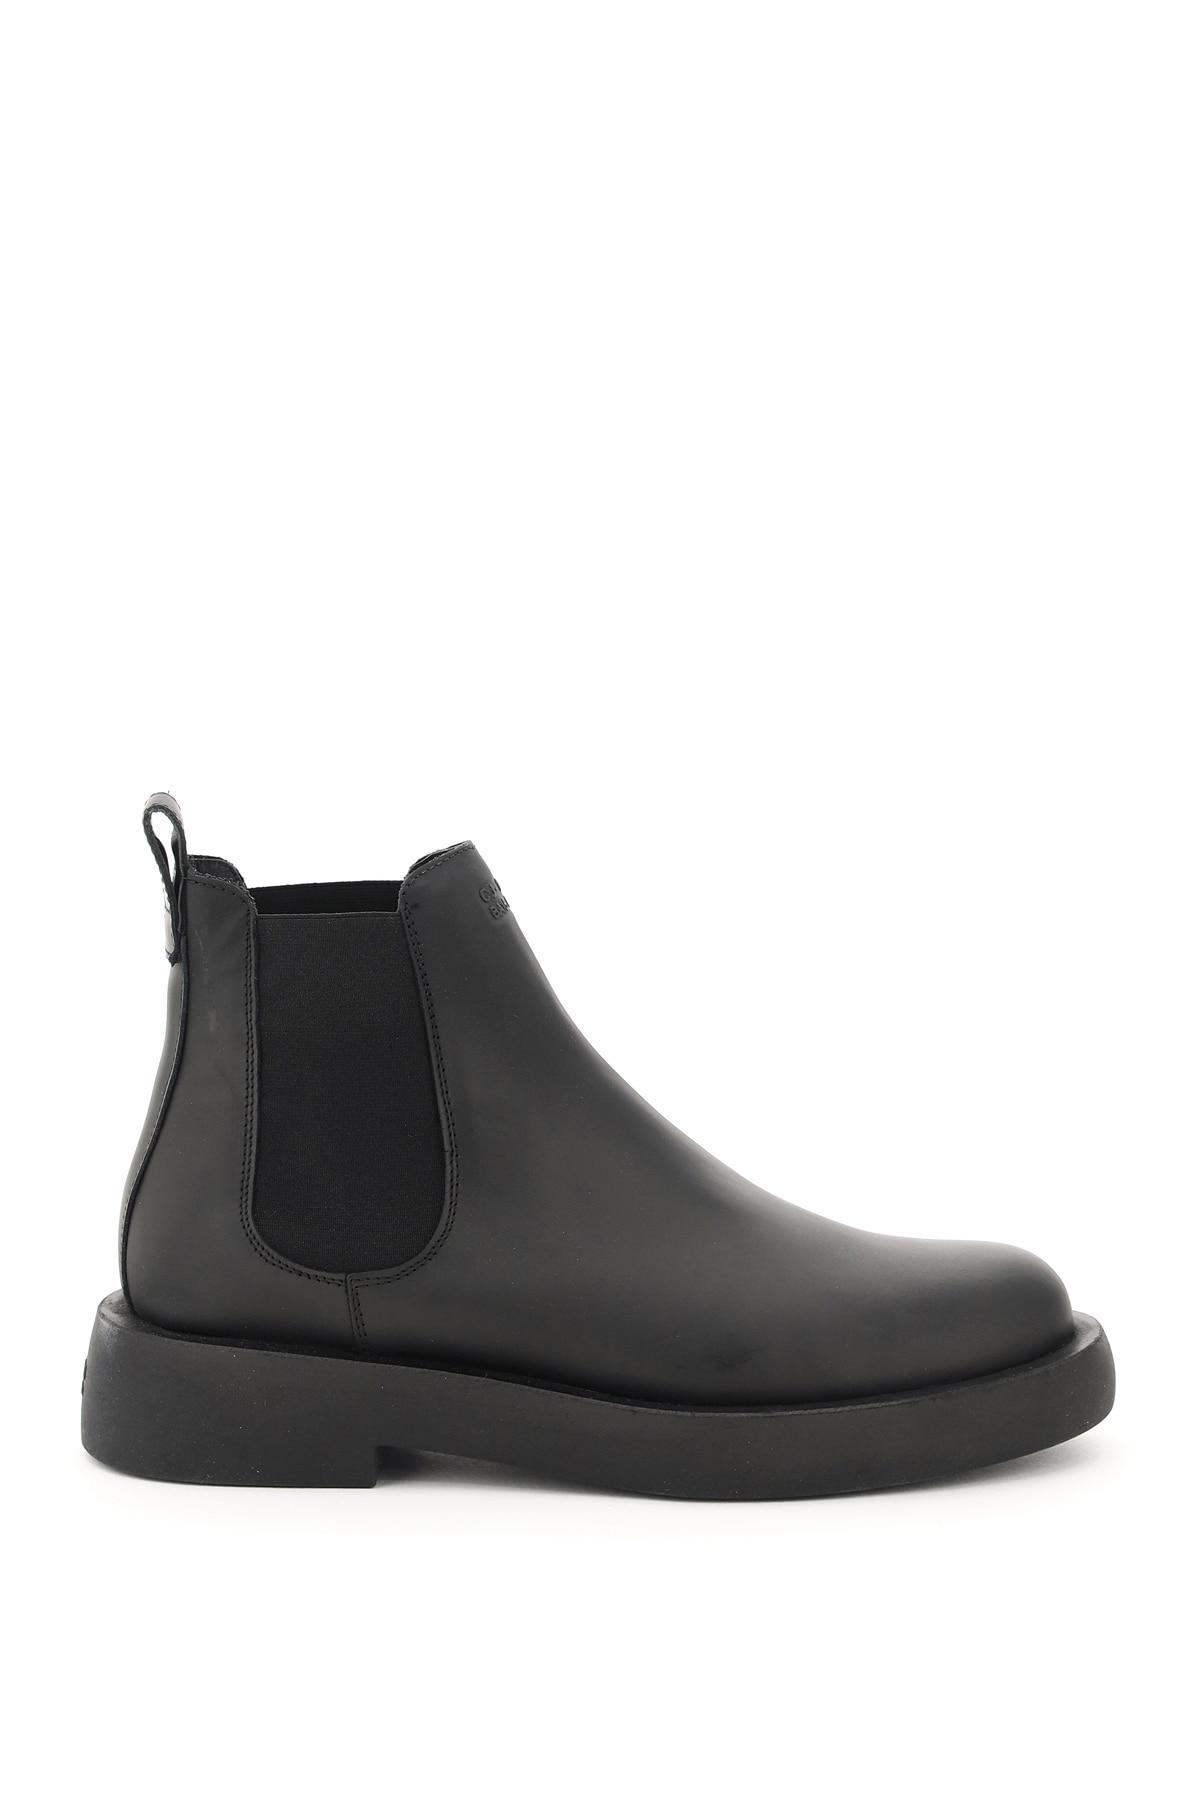 Clarks Leather Mileno Chelsea Boots in Black for Men | Lyst